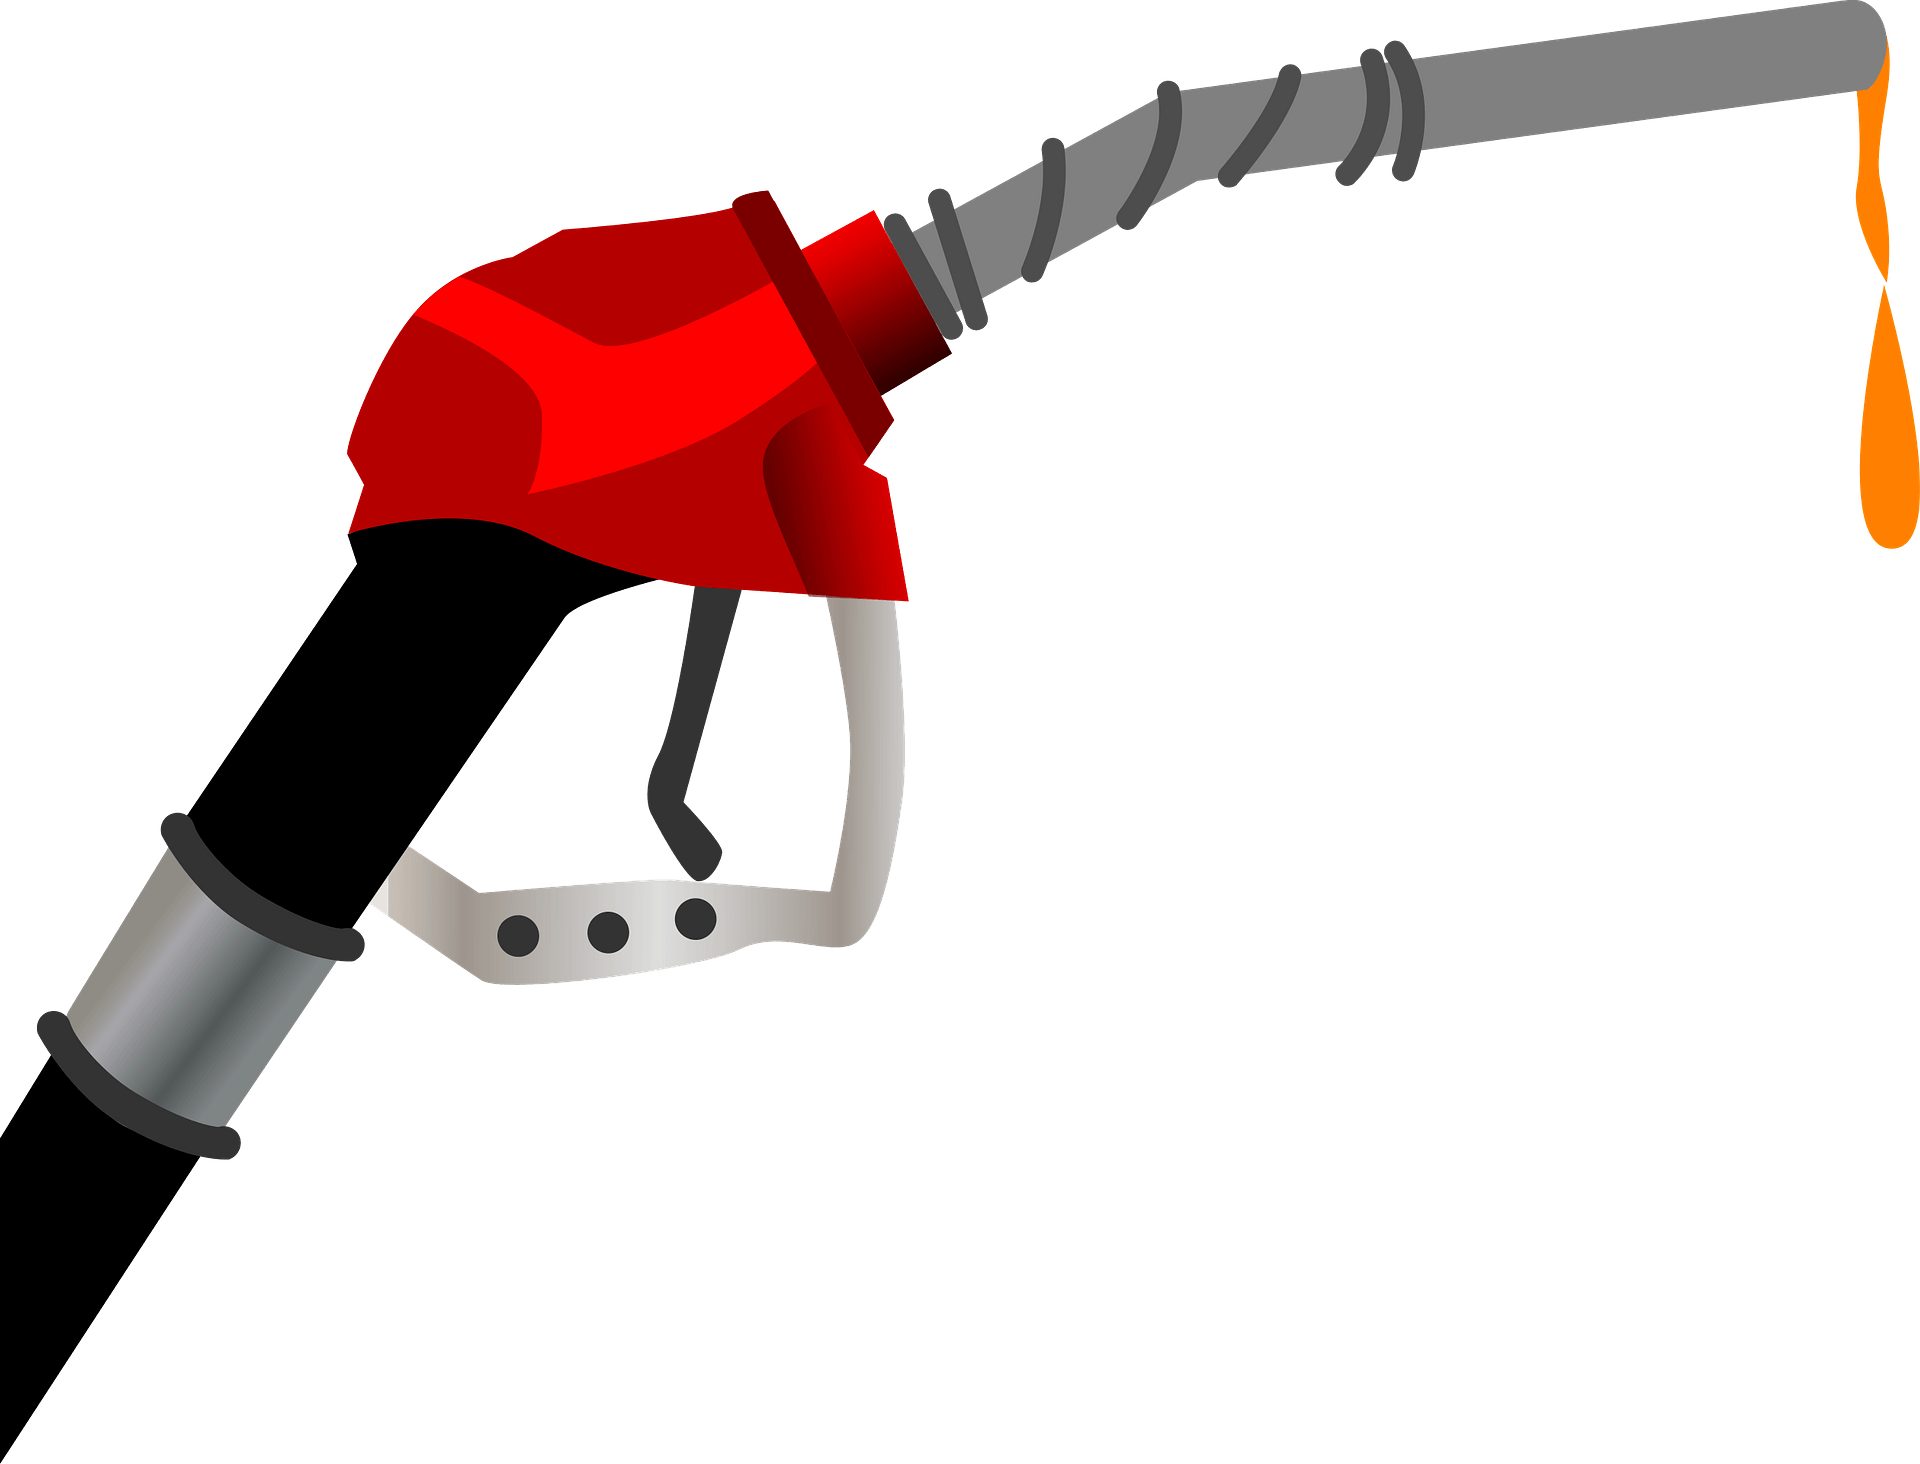 High Quality Red Petrol Pump See through Background Blank Meme Template